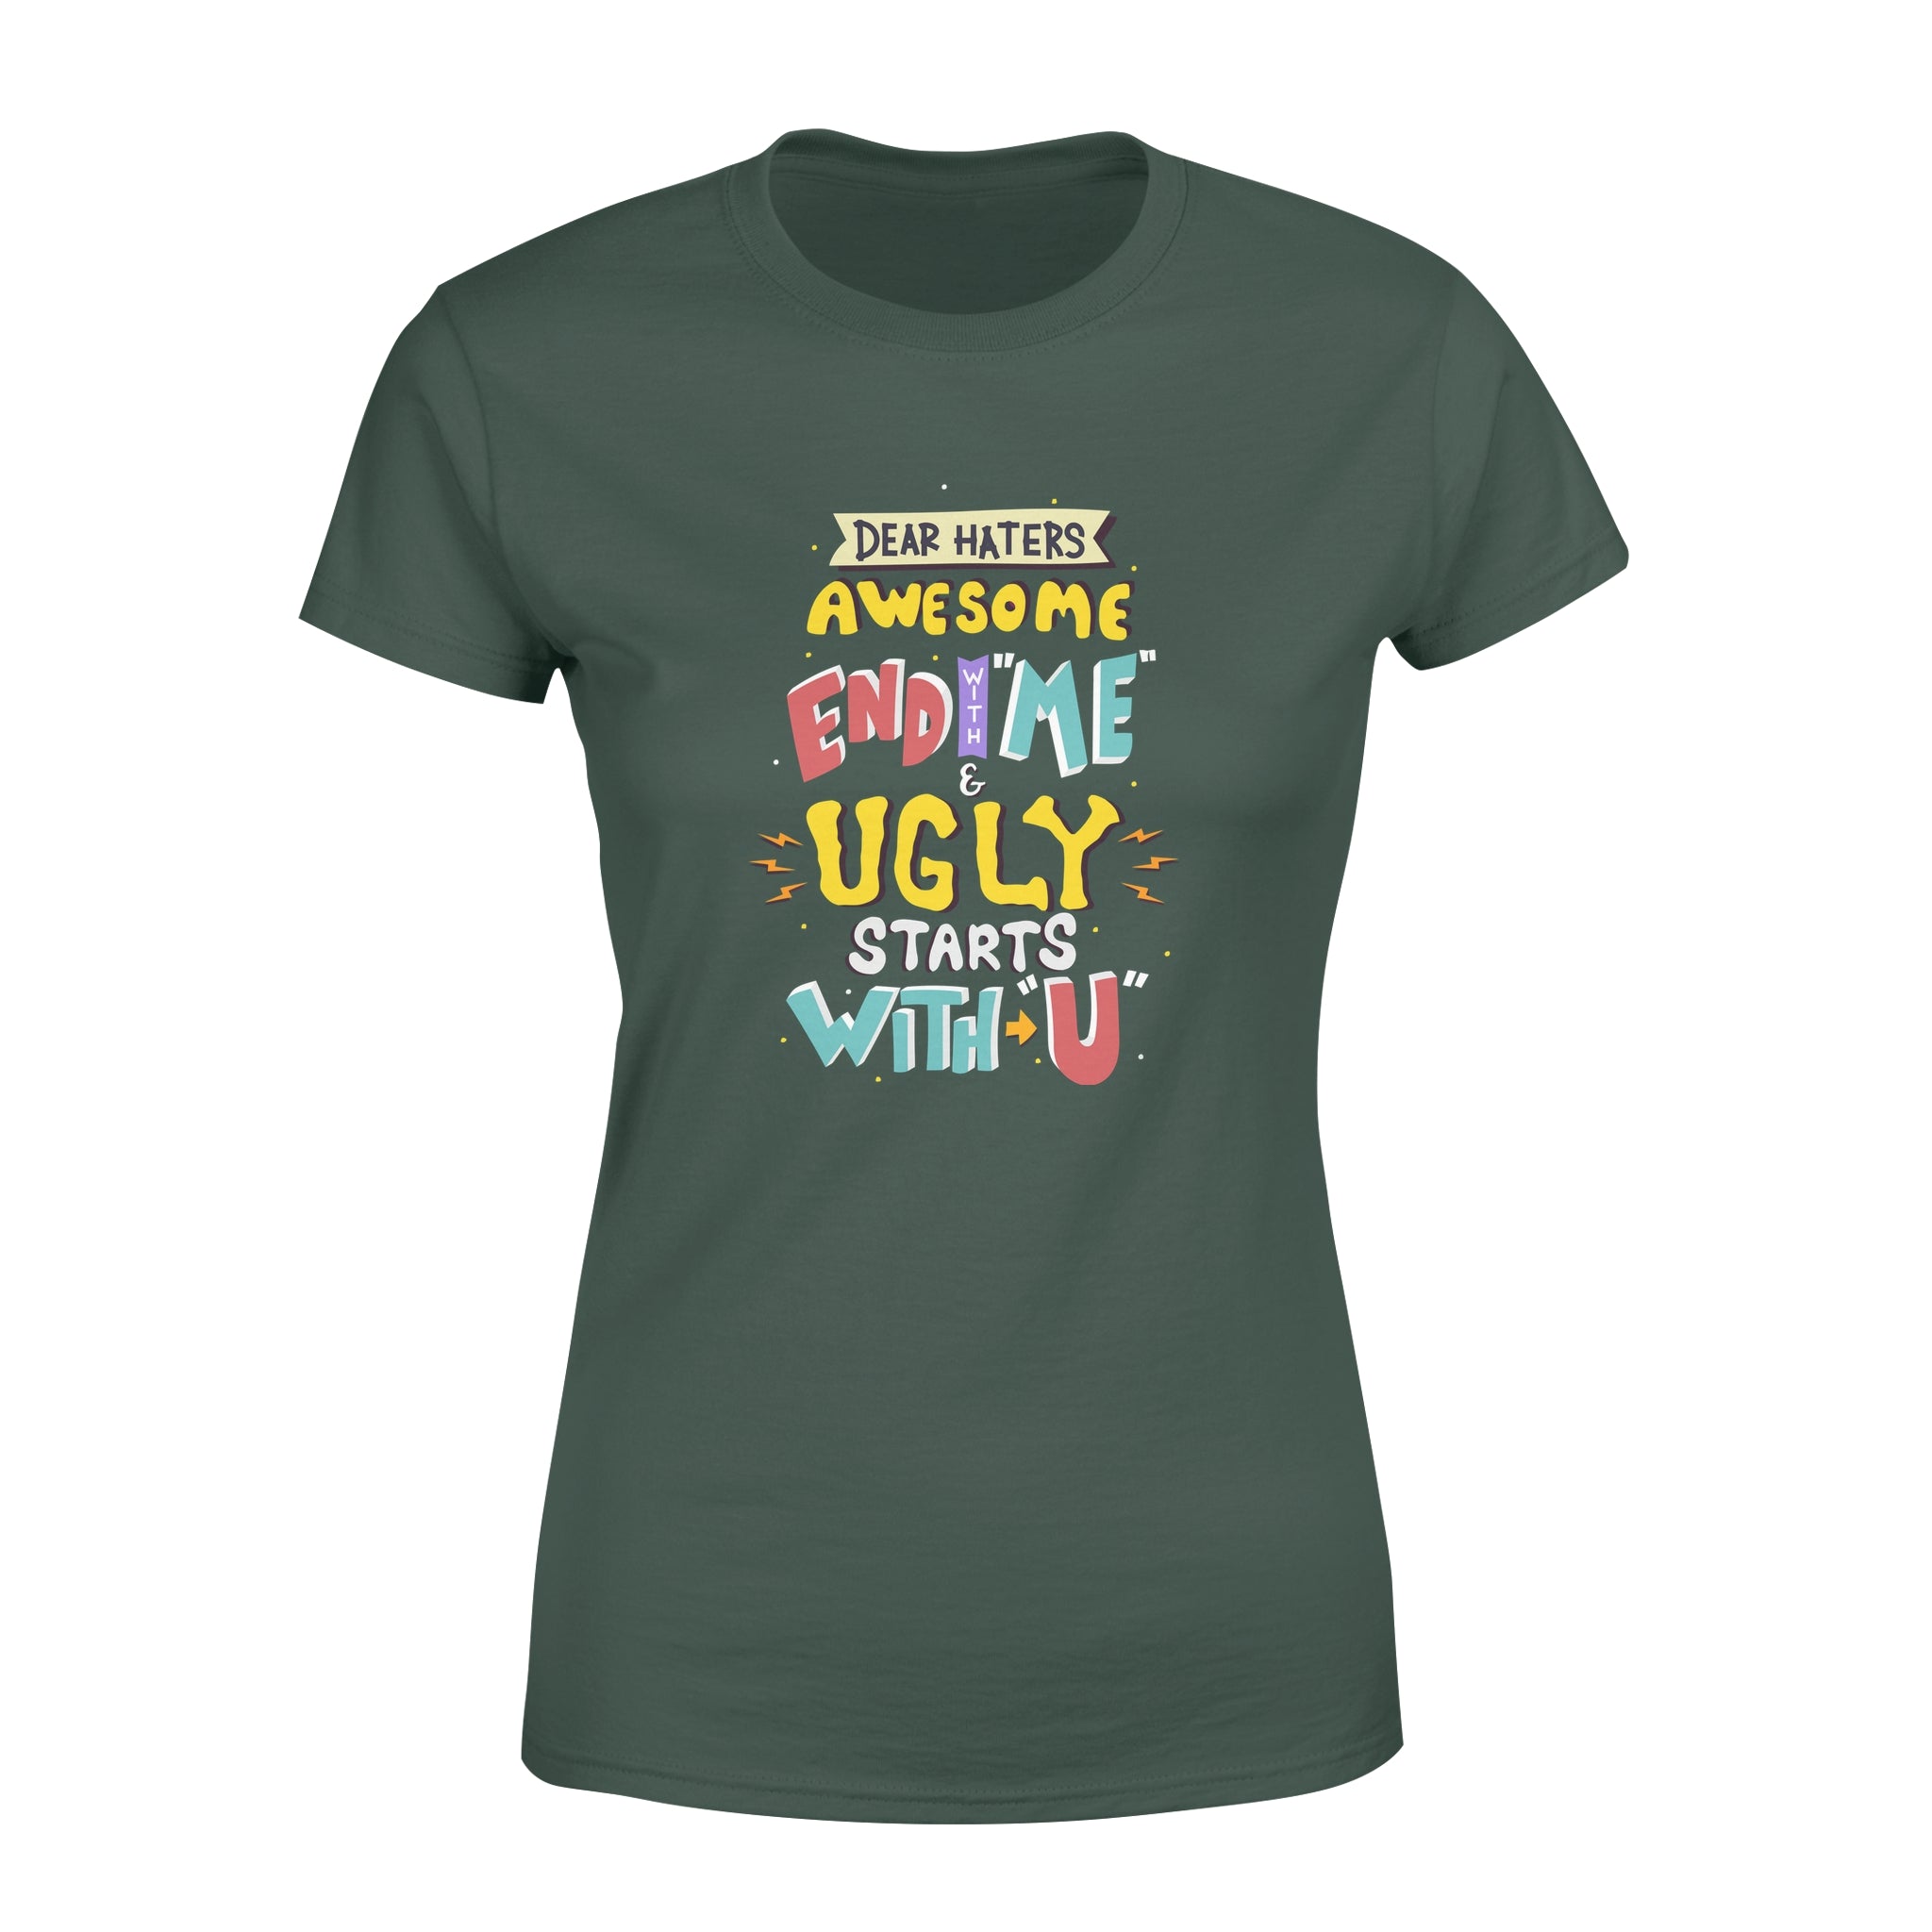 Dear Hates Awesome End With Me and Ugly Starts With You - Women's T-shirt